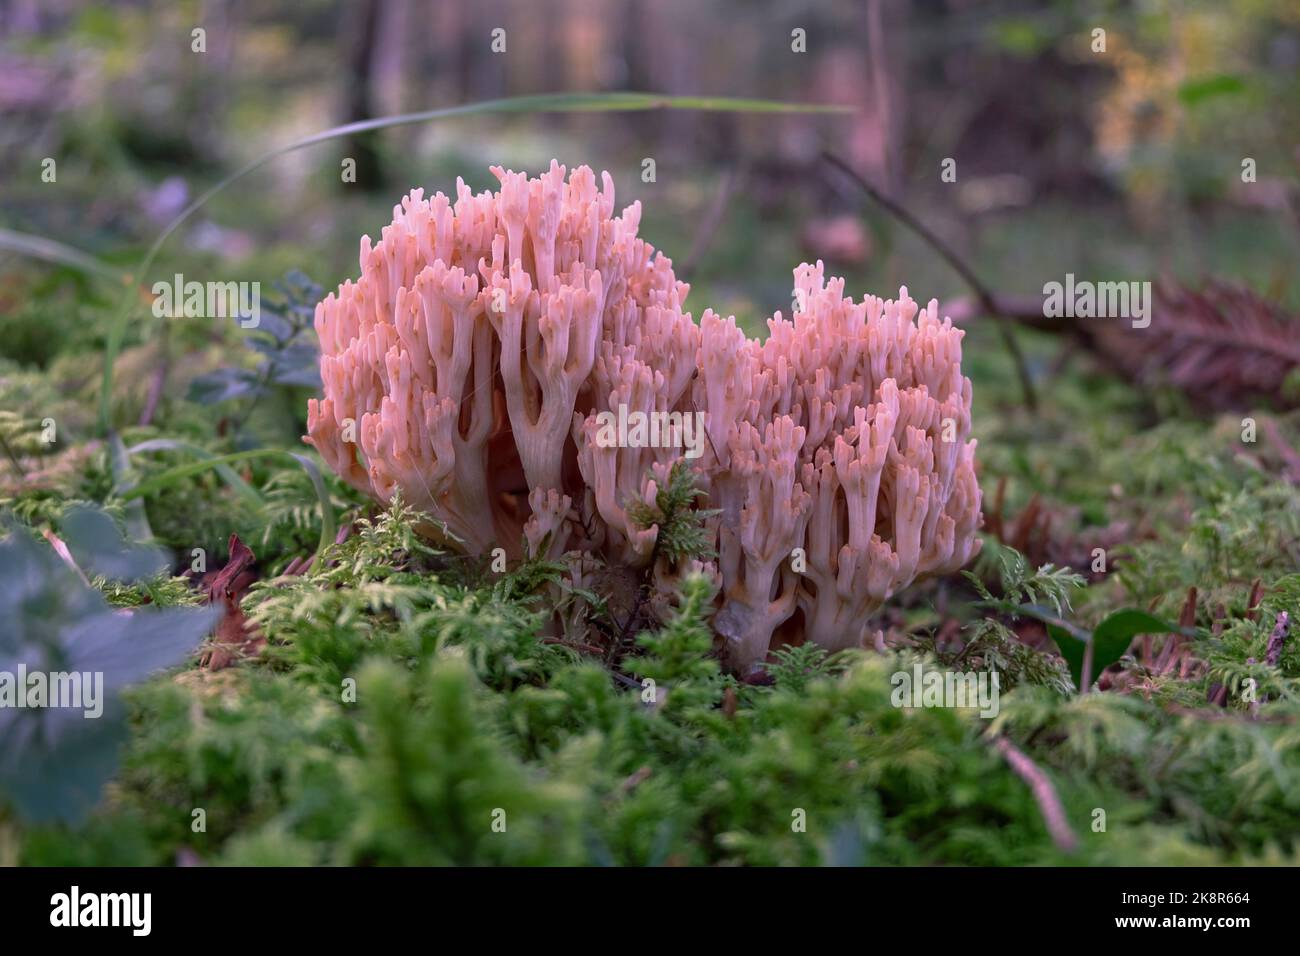 Ramaria farmosa, pink coral mushroom close-up. Salmon coral in the fotest ground with moss. Stock Photo